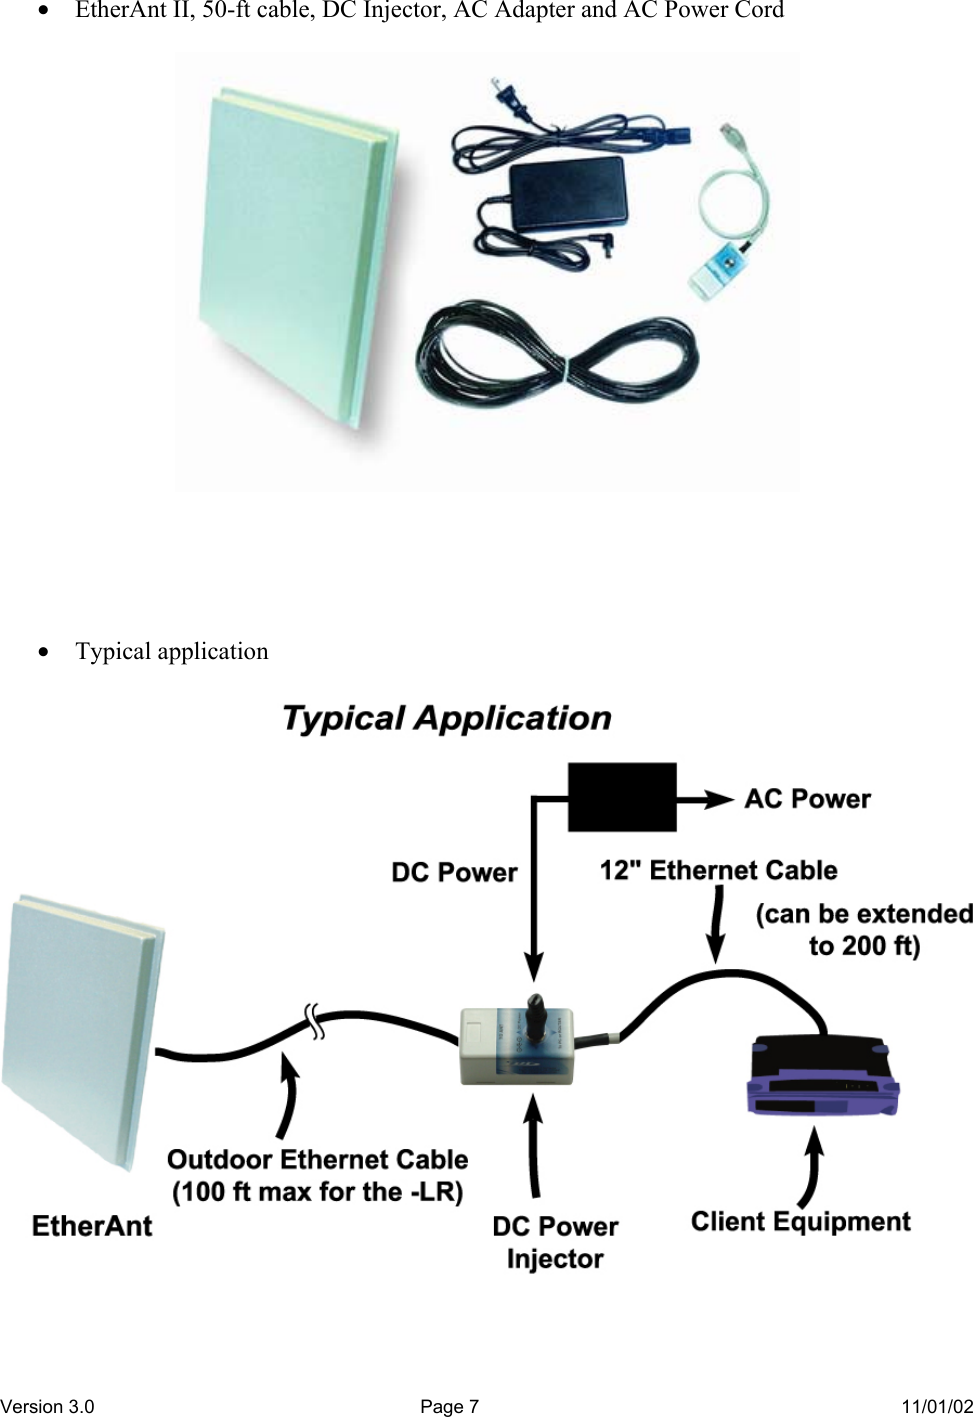 Version 3.0  Page 7  11/01/02 •  EtherAnt II, 50-ft cable, DC Injector, AC Adapter and AC Power Cord        •  Typical application   